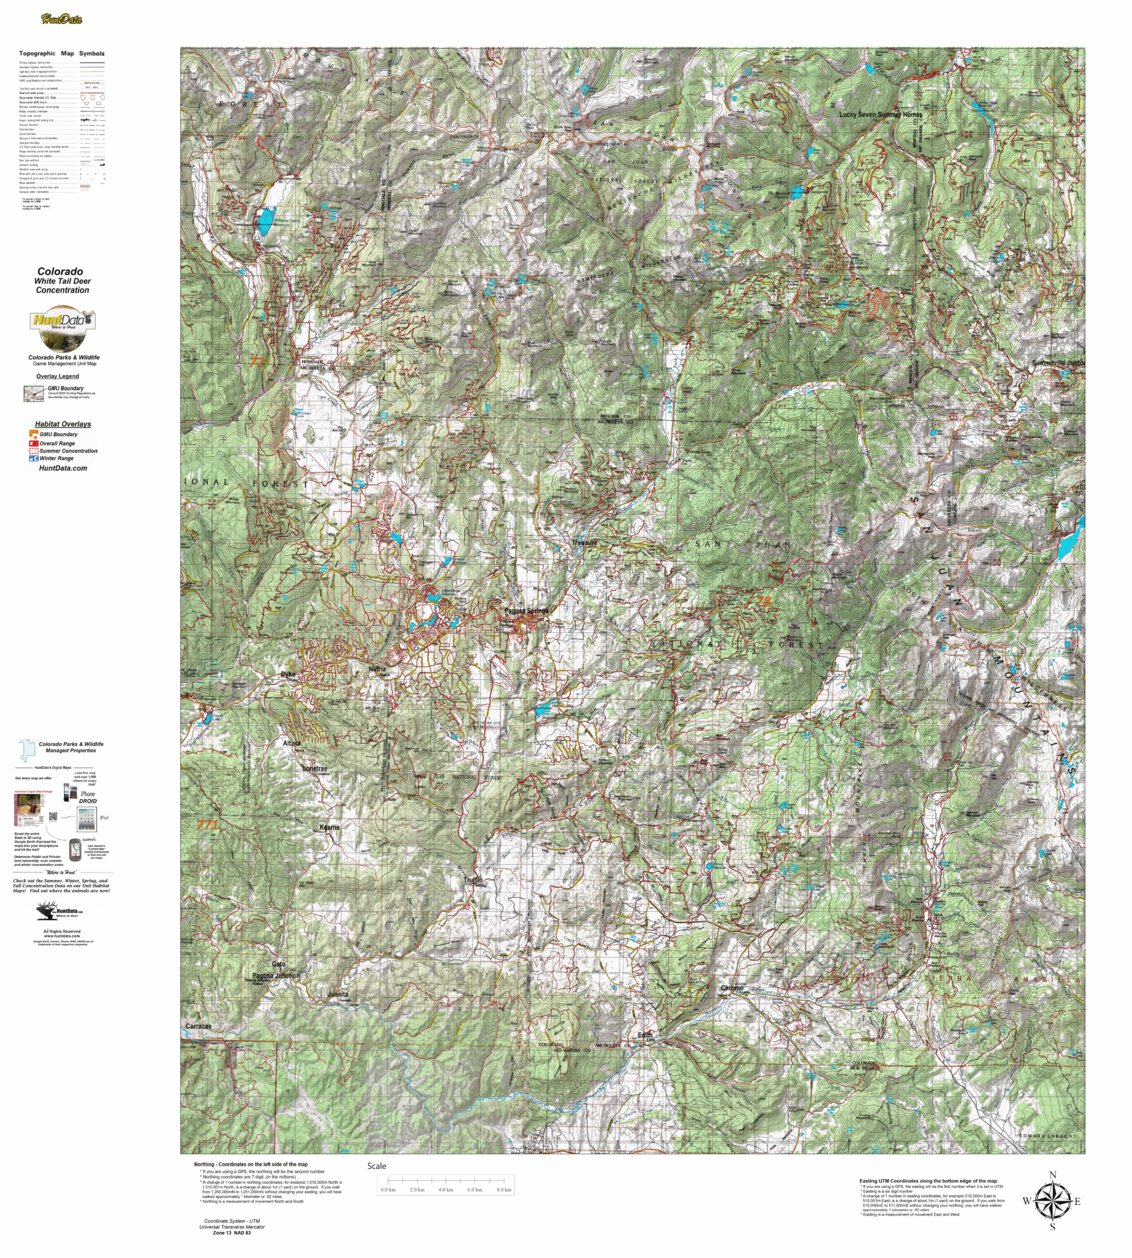 CO_78_White_Tail_Deer_Habitat Map by Colorado HuntData LLC | Avenza Maps